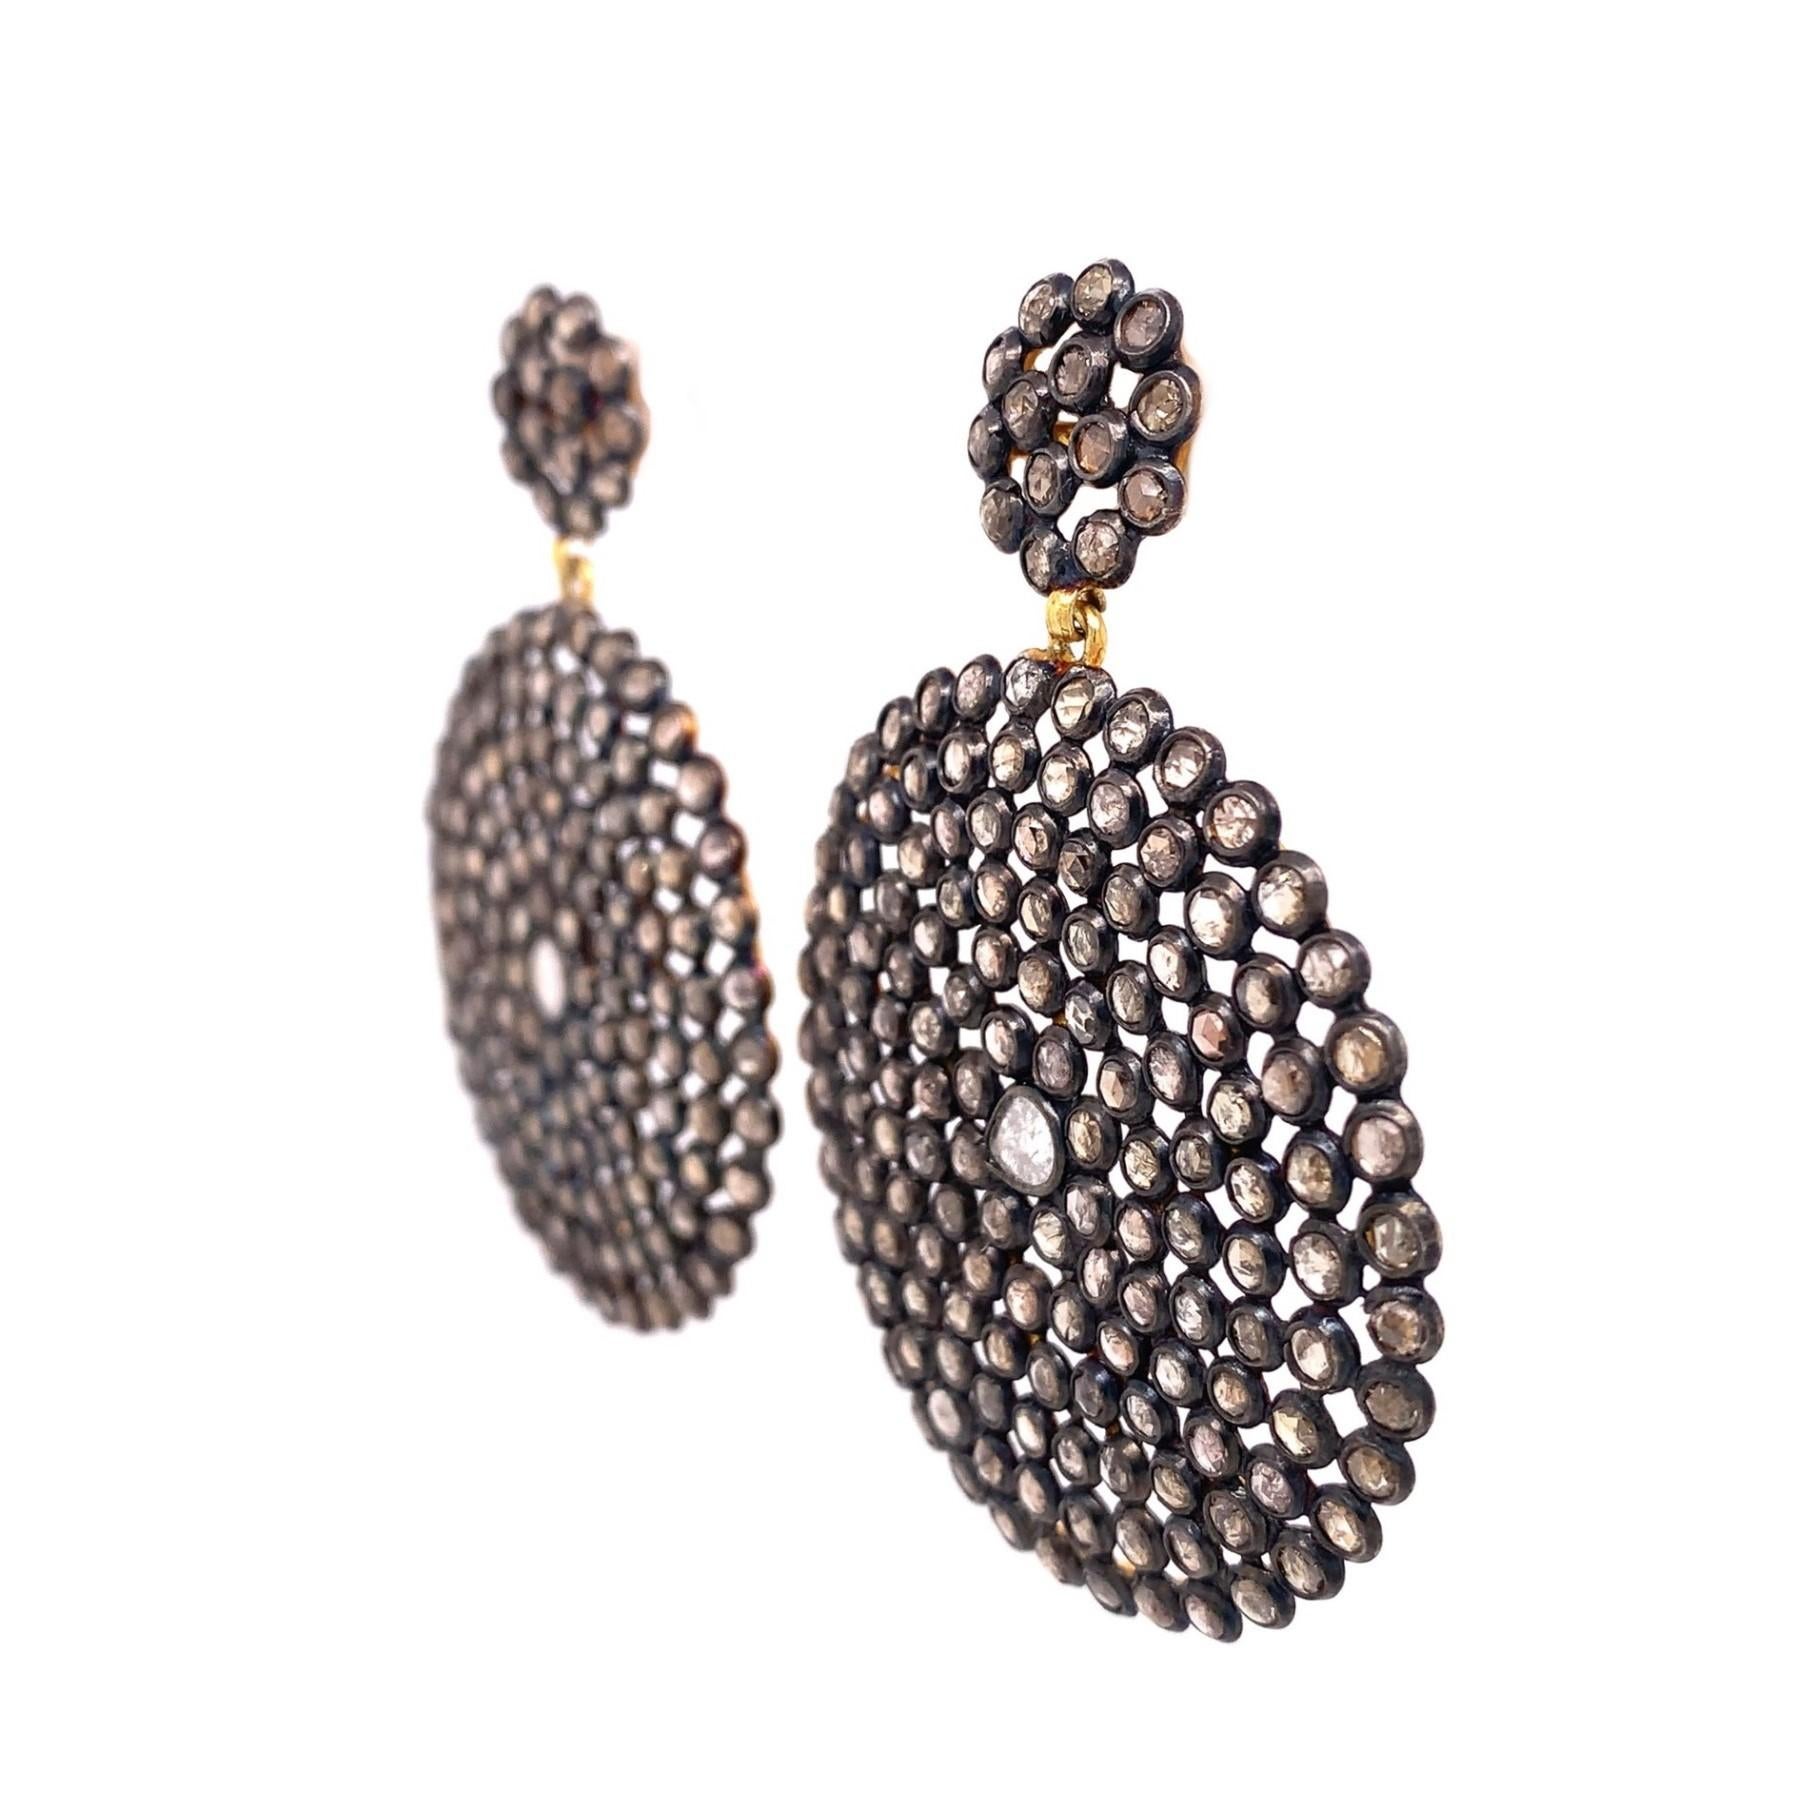 Rustic Collection 

Collection of bezel rose cut brown Diamonds set in a circle shape dangle earrings sterling Silver and 14K yellow gold plating.

Diamond: 20.31ct total weight.